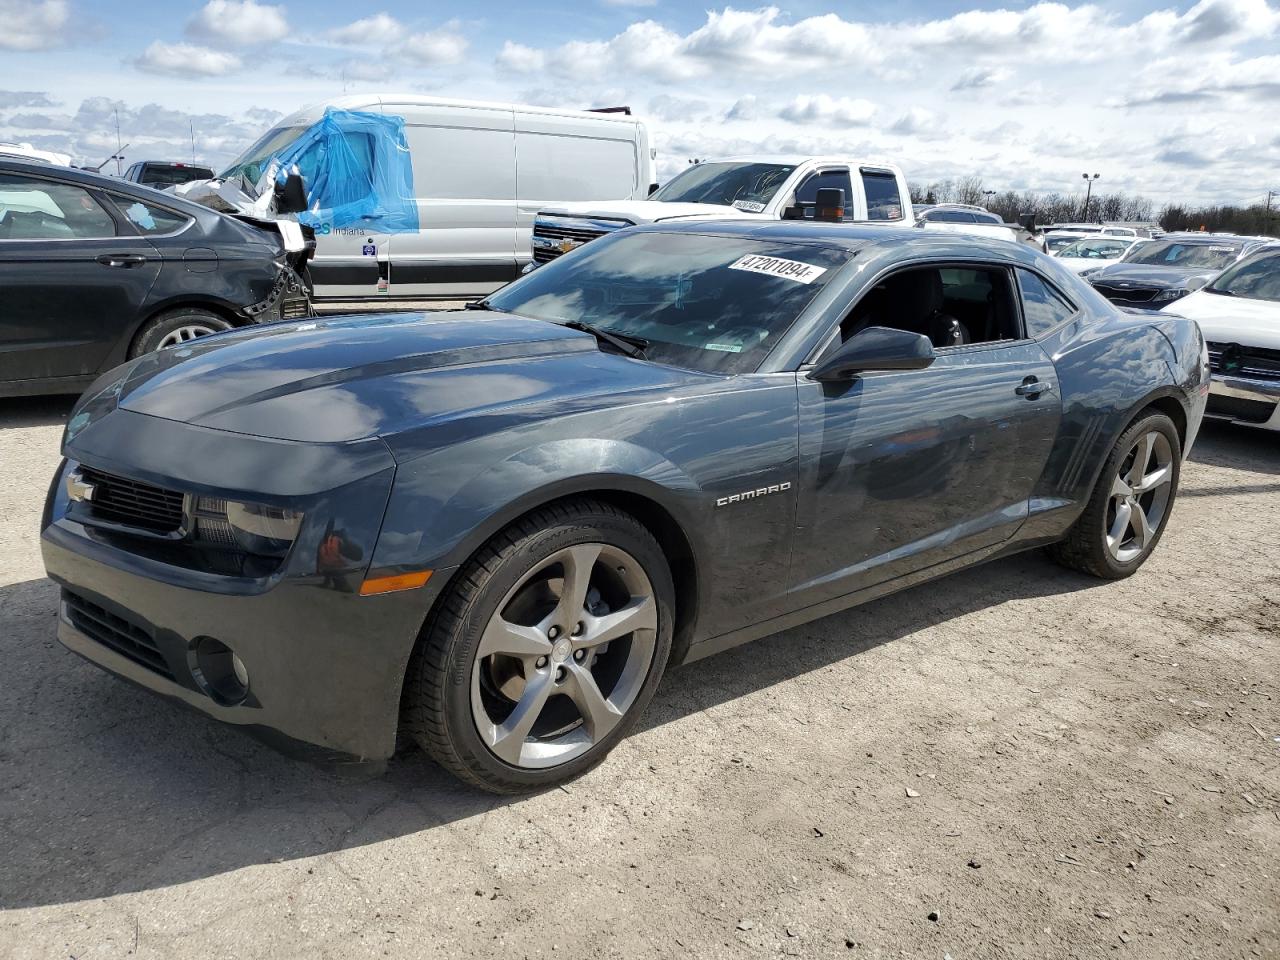 vin: 2G1FB1E37D9154495 2G1FB1E37D9154495 2013 chevrolet camaro 3600 for Sale in 46254 2452, In - Indianapolis, Indianapolis, USA